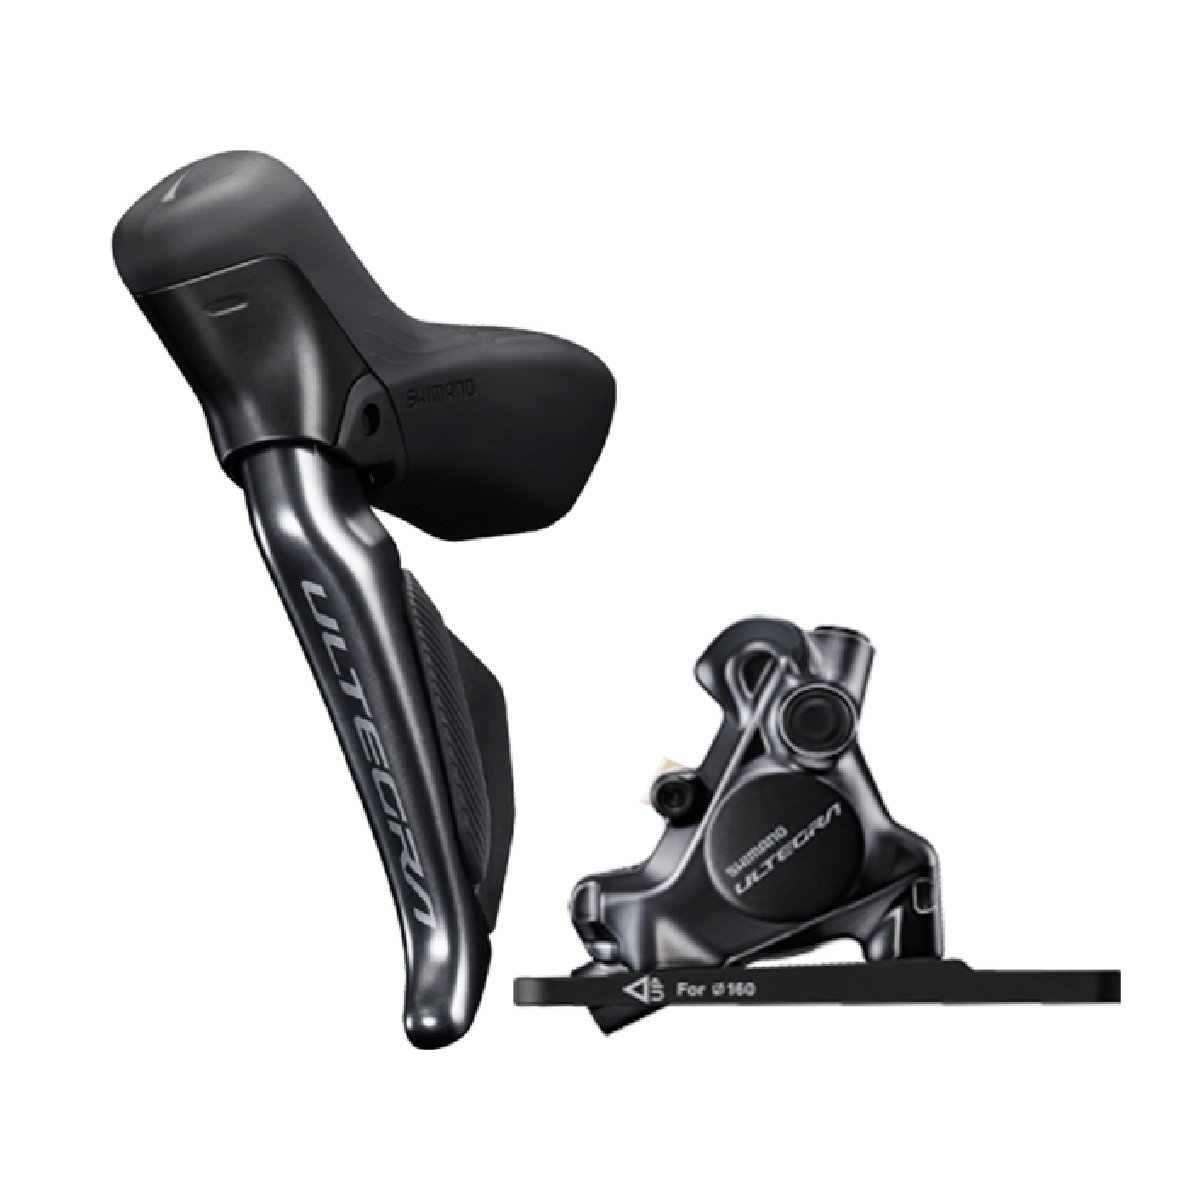 Shimano Ultegra DI2 ST-R8170 Disc Brake Assembled Set - with Stretcher BR-R8170 - Front